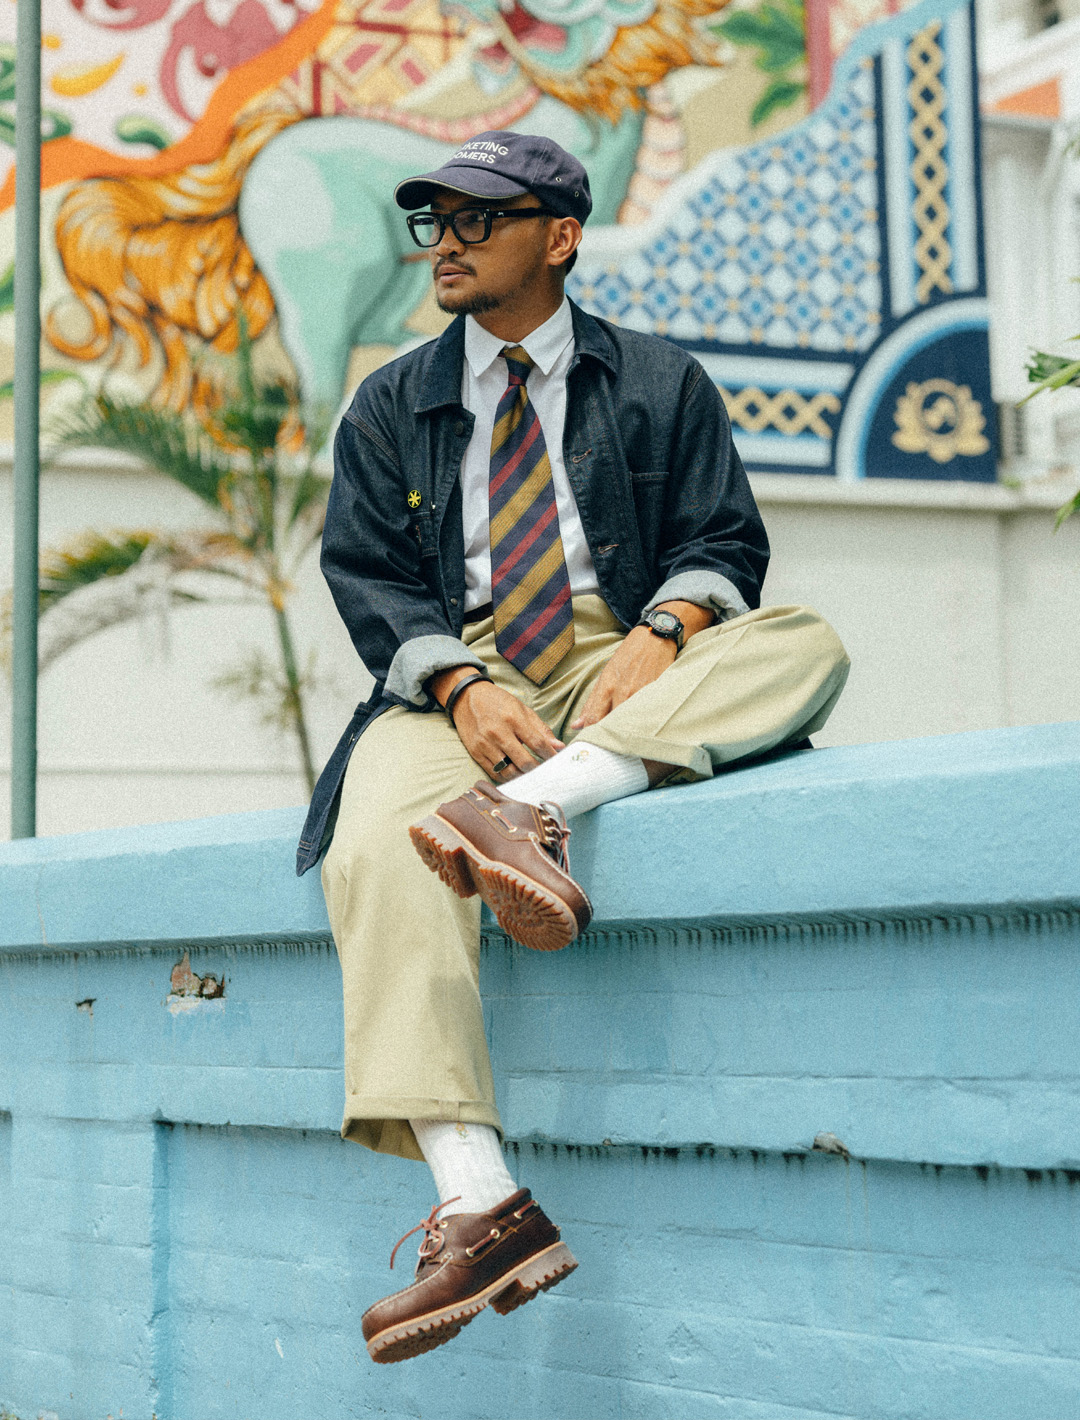 Timberland 3-eye handsewn boat shoe on Airil who pairs it with denim jacket, white shirt, tie and chinos